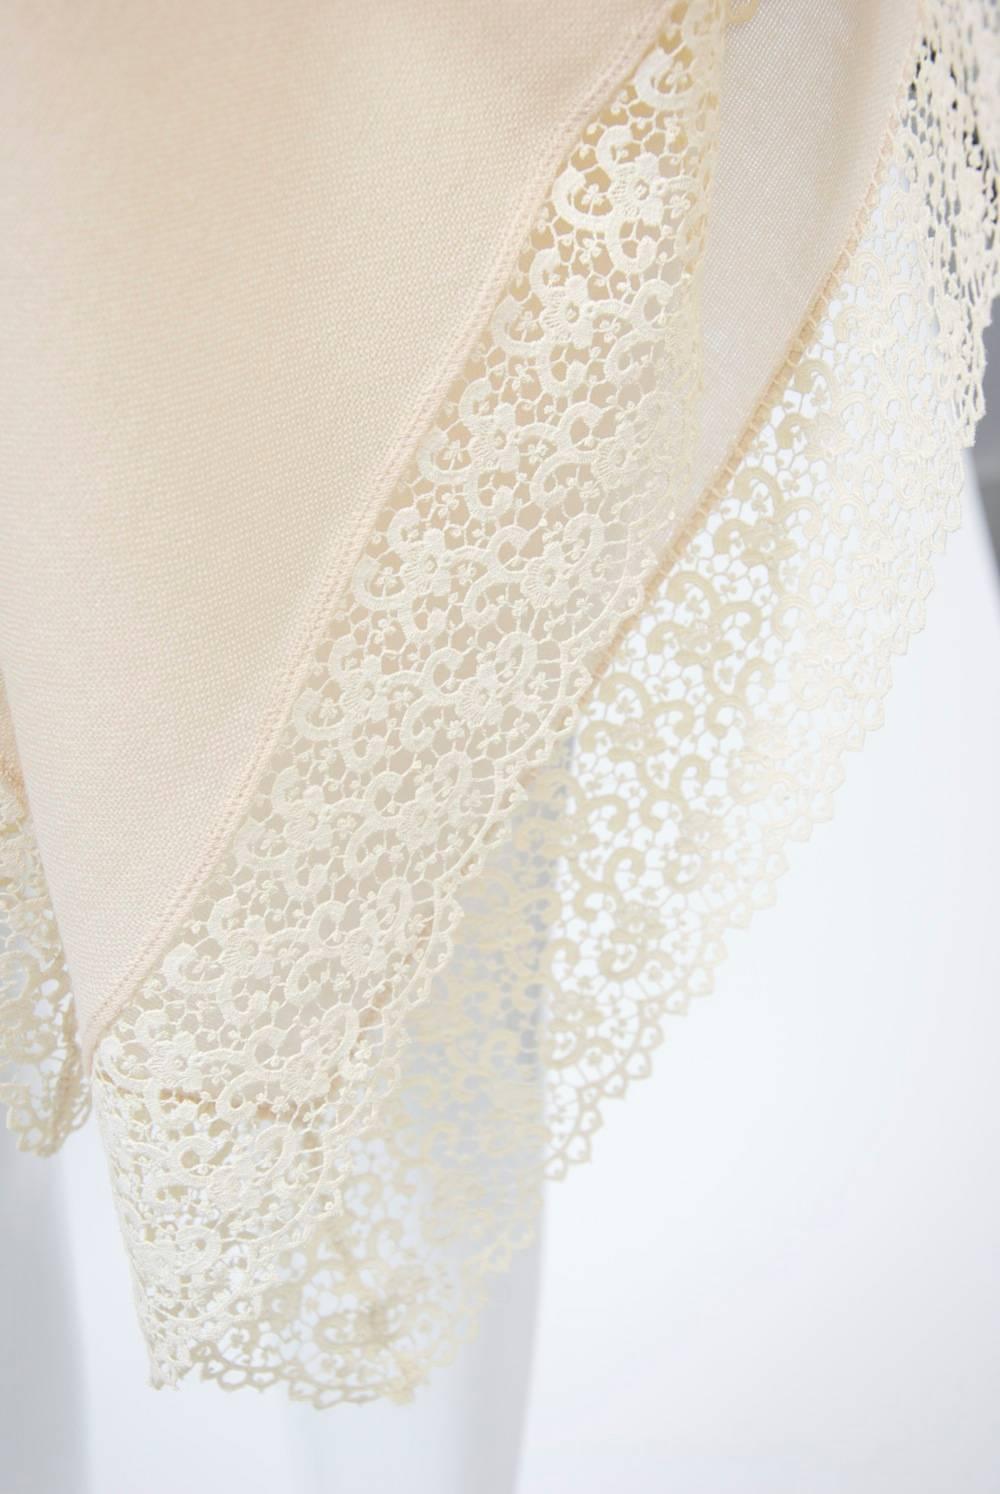 A finely woven shawl in ivory wool bordered with lace. Large square in excellent condition. Beautiful, lightweight hand. Bergdorf Goodman label.